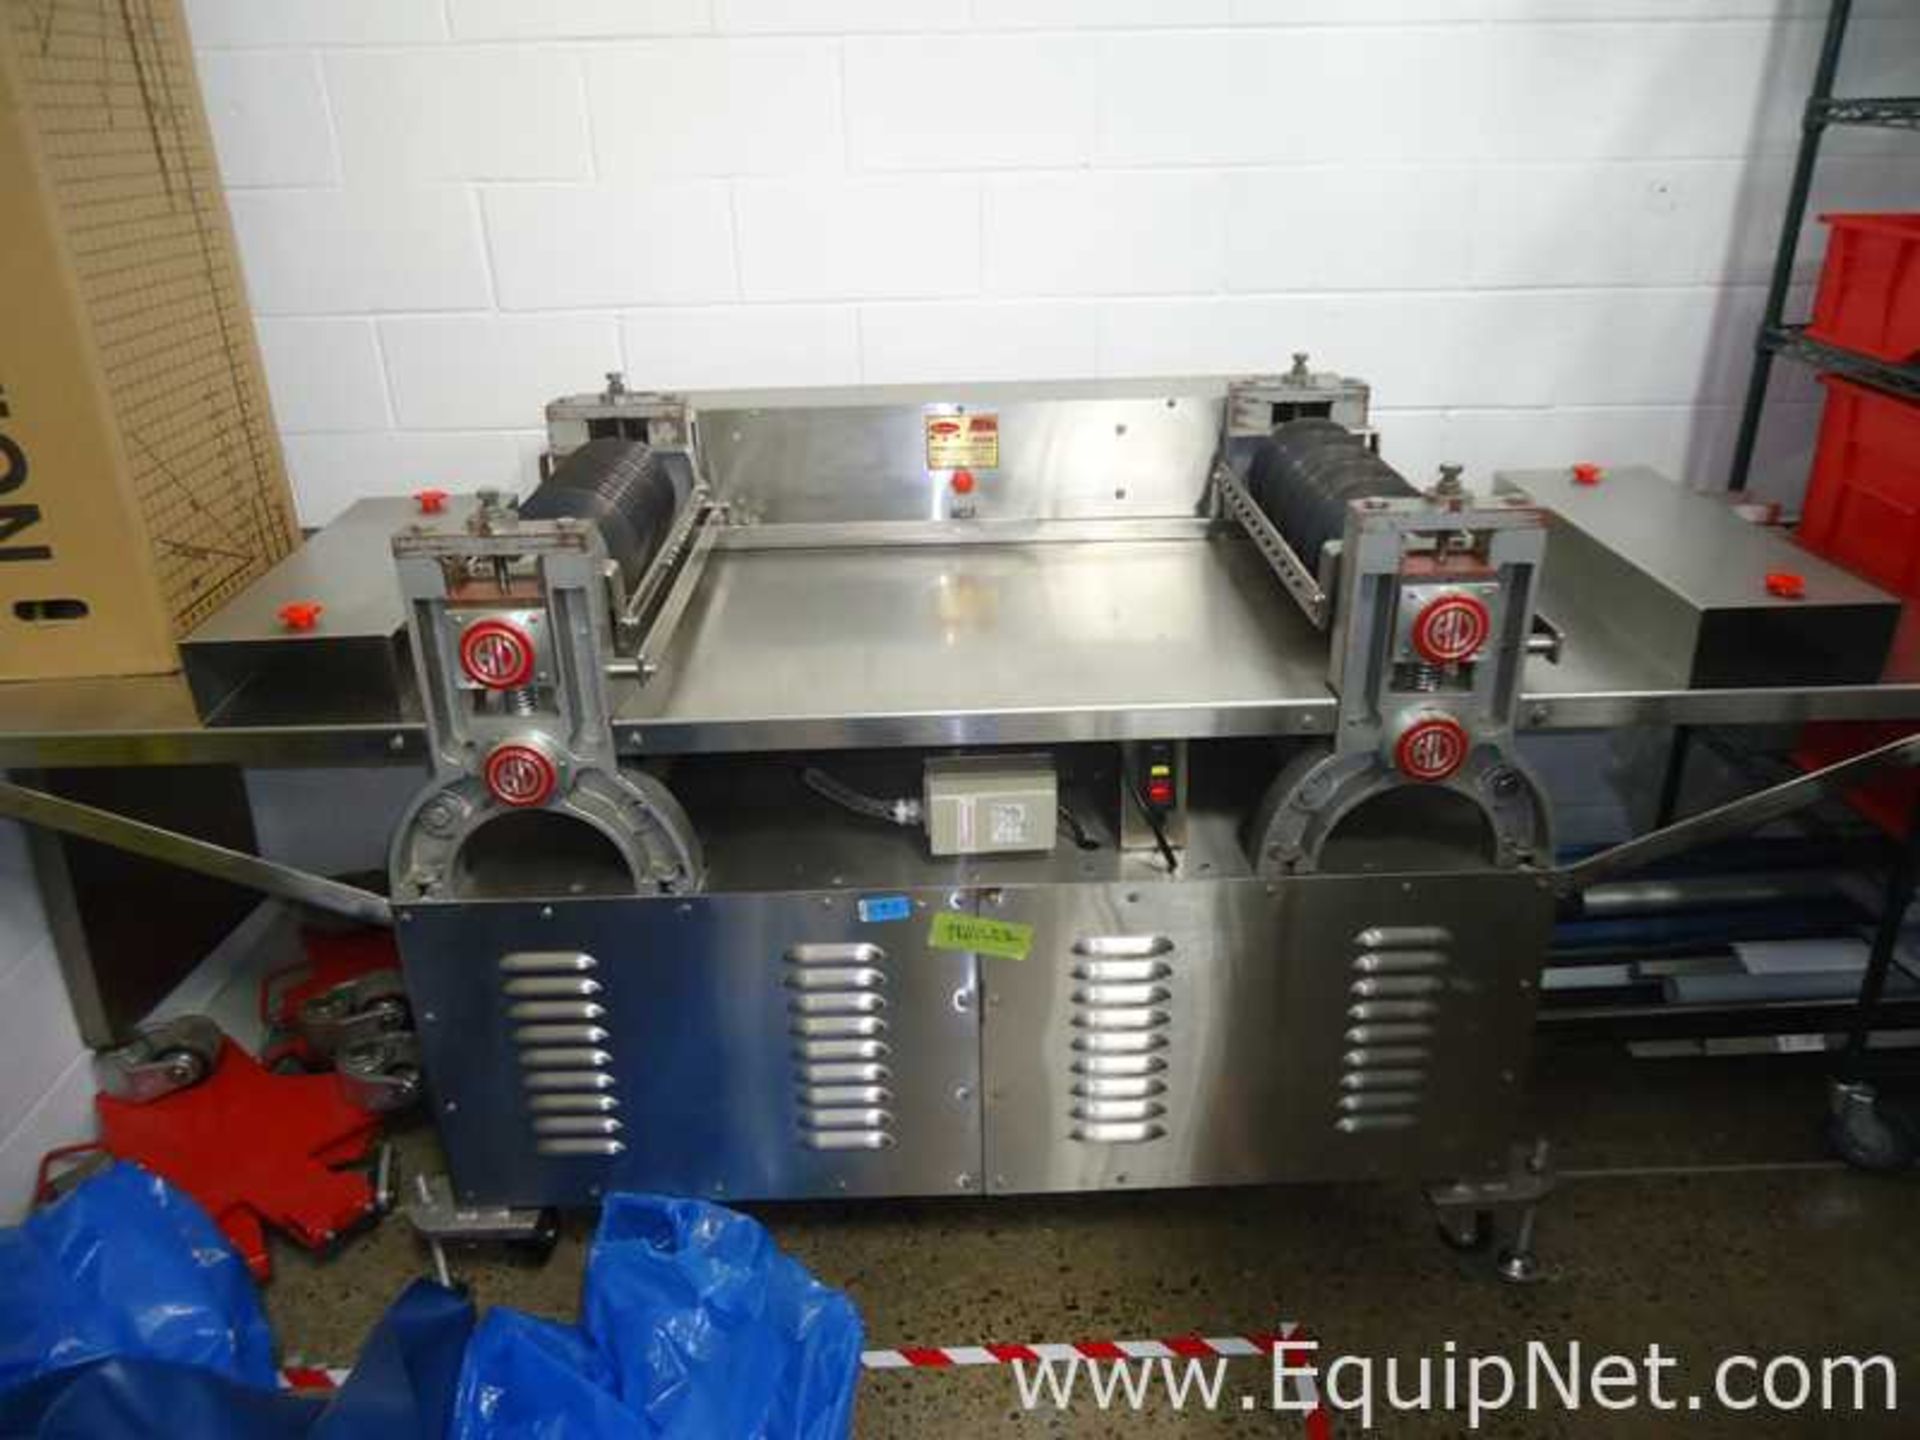 DESCRIPTION: Taiwan Luxuriance Corp. TL.343B Table CutterIncludes multiple knife sets and storage